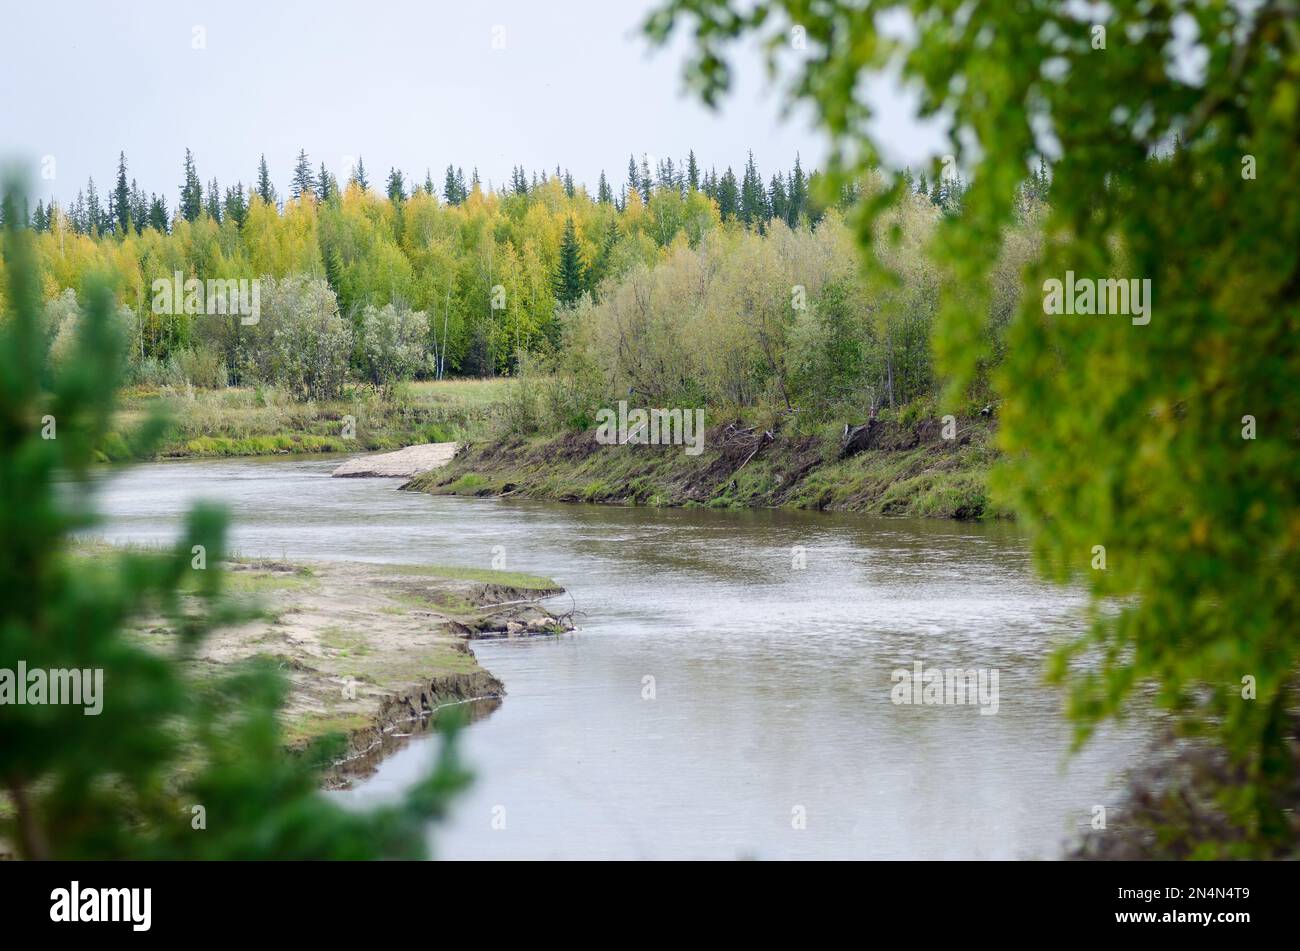 The turn of the small Northern river is seen through the fuzzy leaves of trees in autumn in the North of Yakutia. Stock Photo